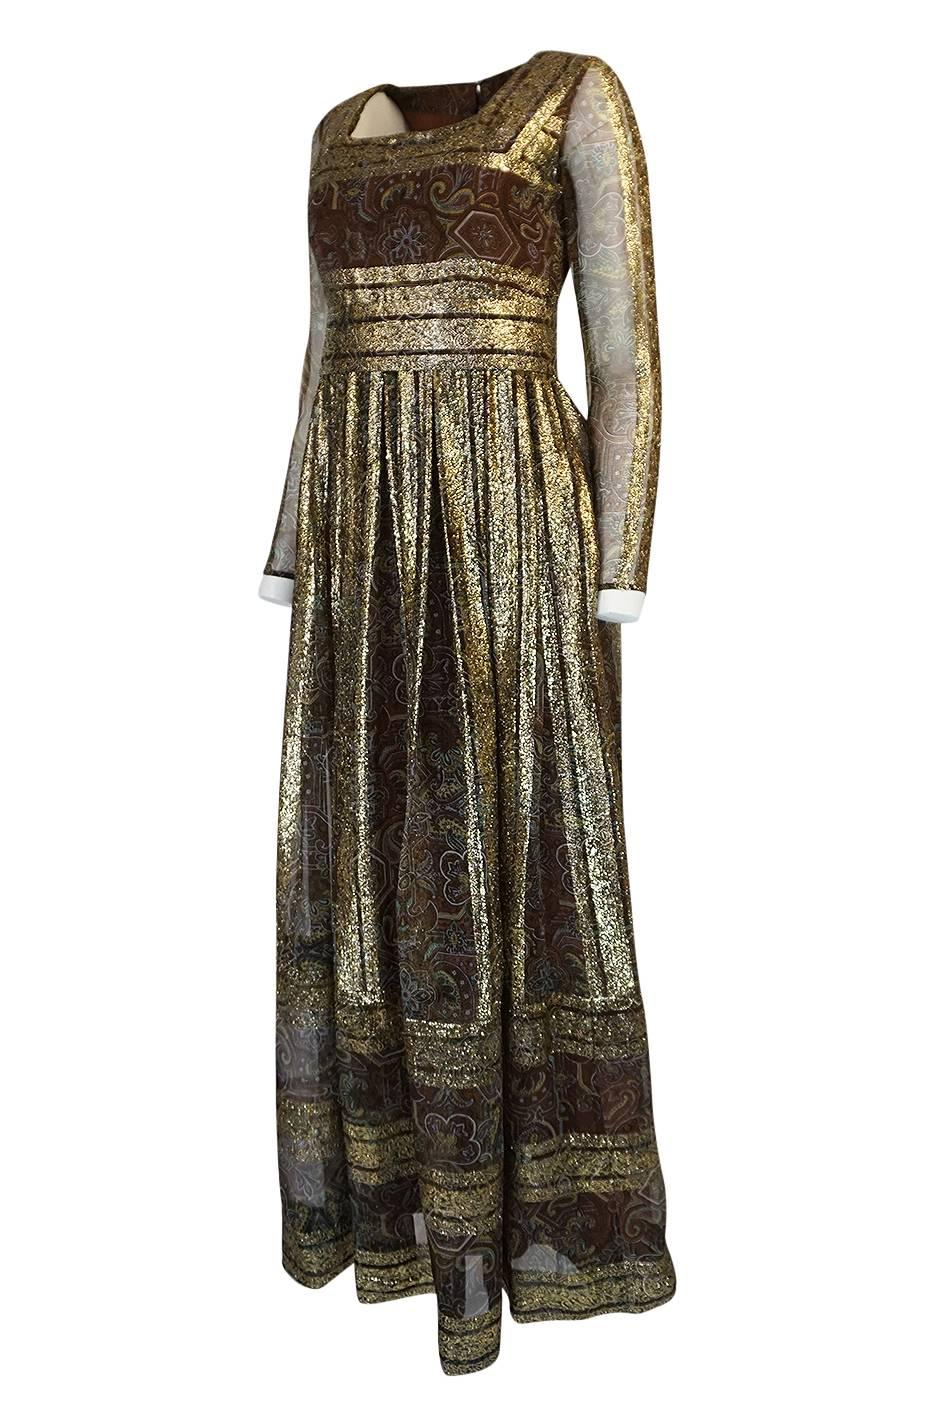 Women's Christian Dior by Marc Bohan Demi-Couture Gold and Printed Silk Dress, c 1968